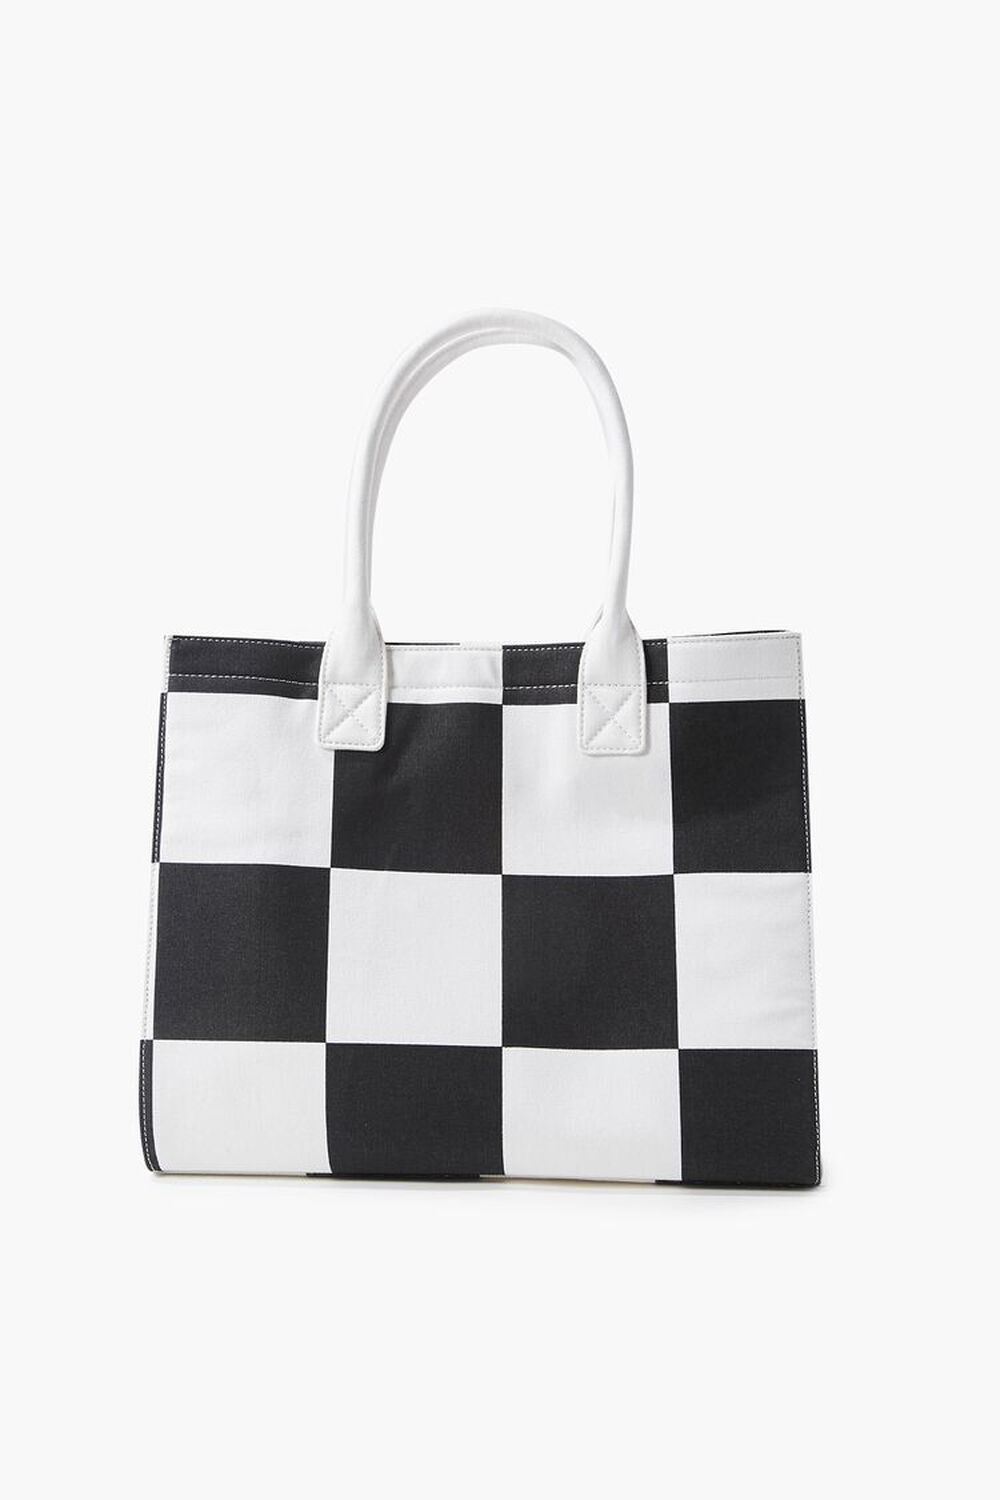 Checkered Pattern Tote Bag